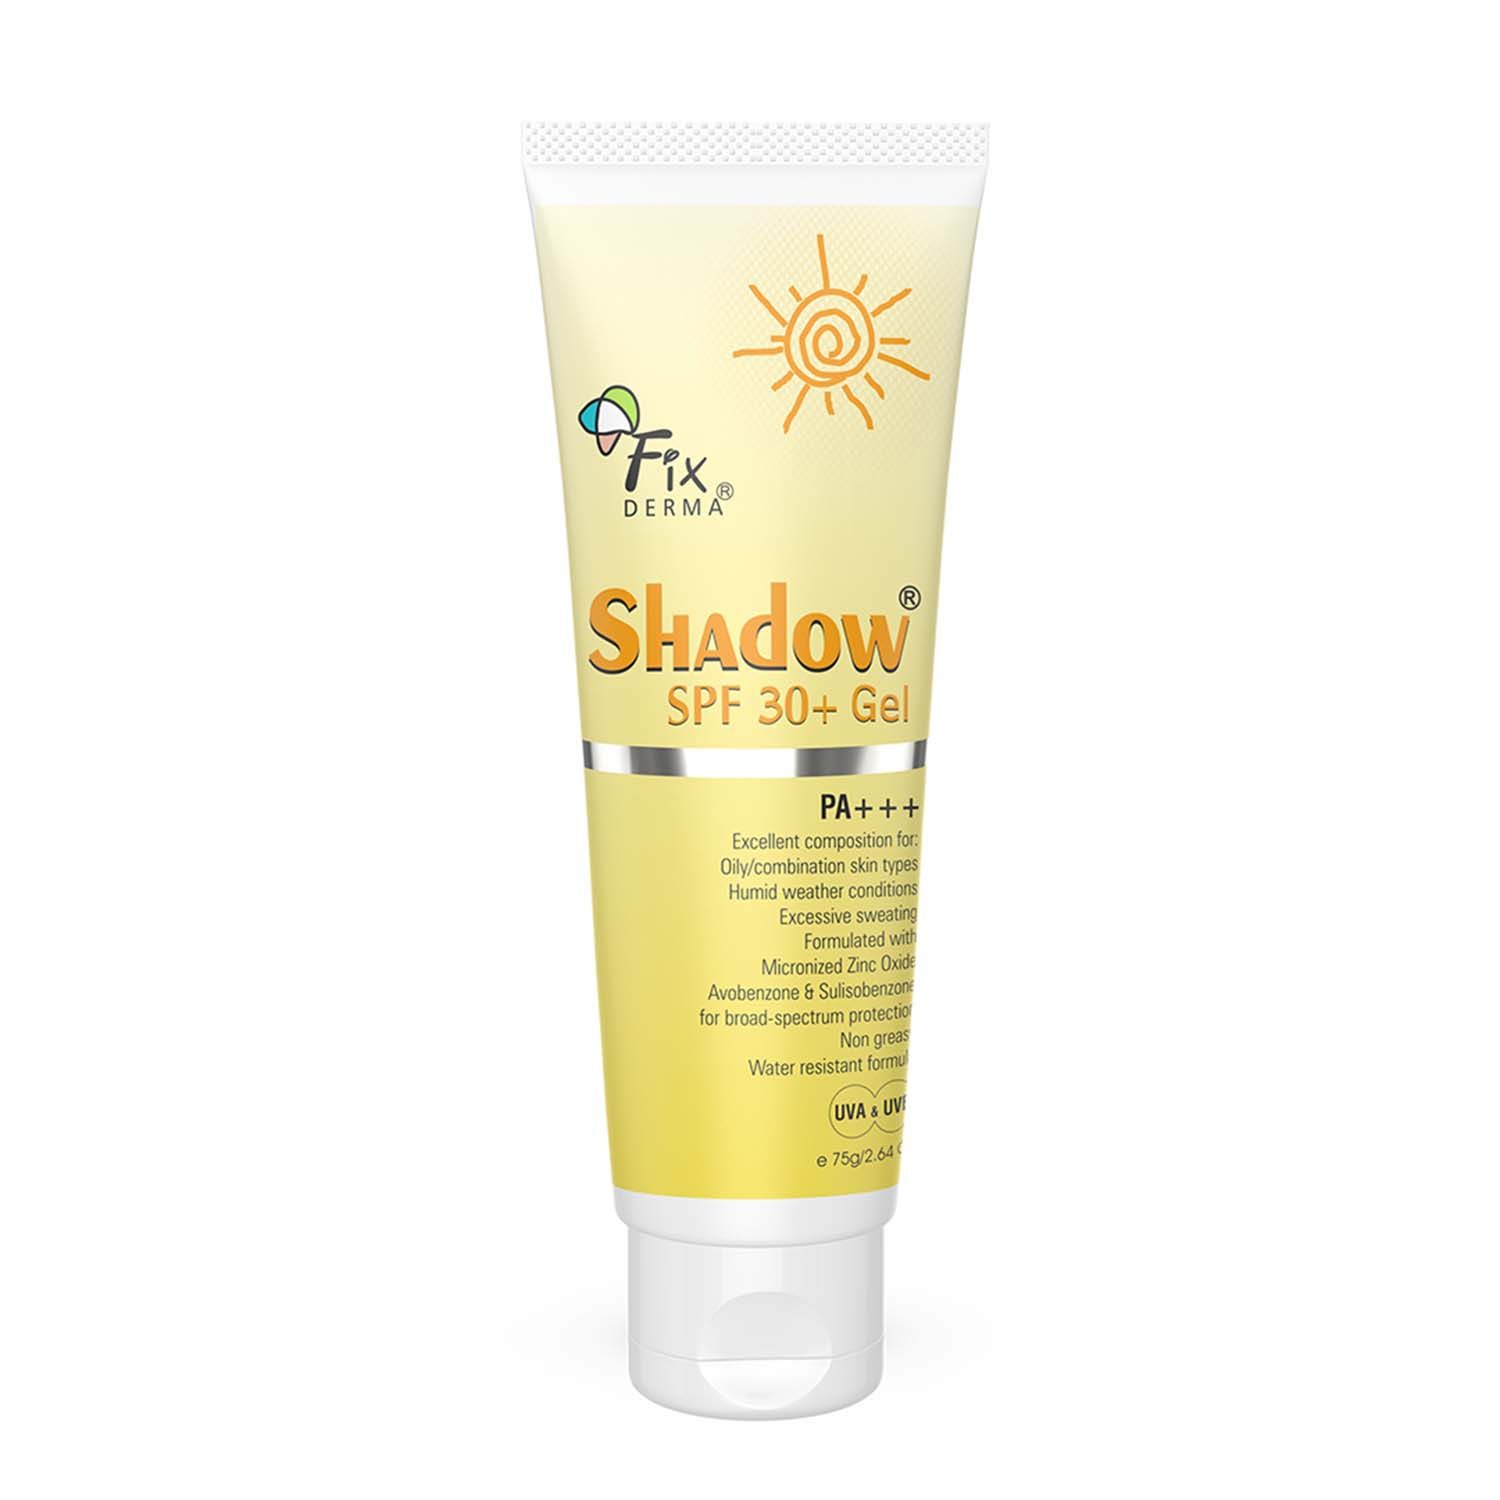 Buy Fixderma Shadow Sunscreen SPF 30+ Gel Sunscreen For Oily Skin, Sun Screen Protector SPF 30 For Body & Face, Broad Spectrum For Uva & Uvb Protection Non Greasy & Water Resistant For Unisex, 75gm - Purplle